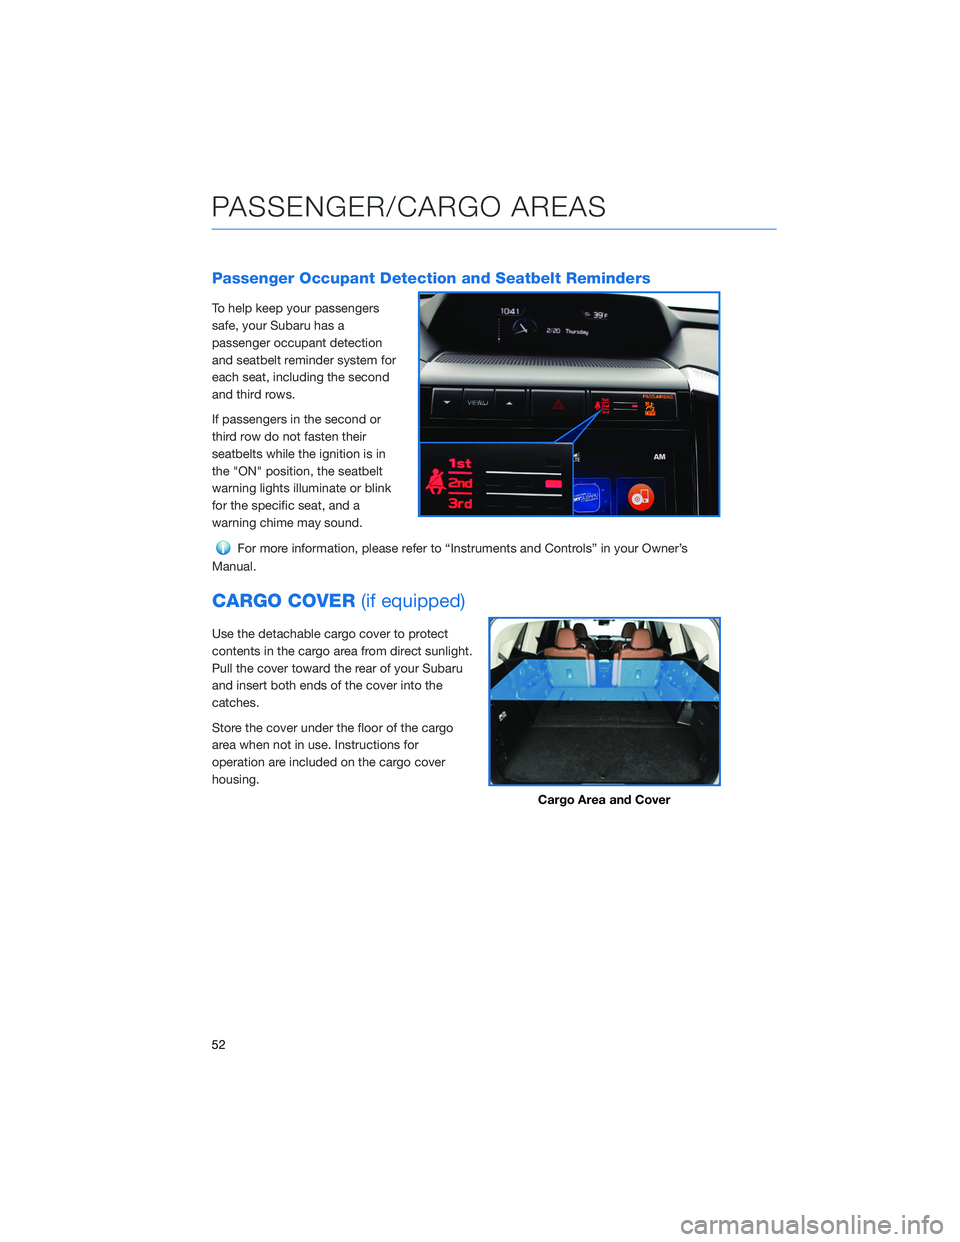 SUBARU ASCENT 2022  Getting Started Guide Passenger Occupant Detection and Seatbelt Reminders
To help keep your passengers
safe, your Subaru has a
passenger occupant detection
and seatbelt reminder system for
each seat, including the second
a